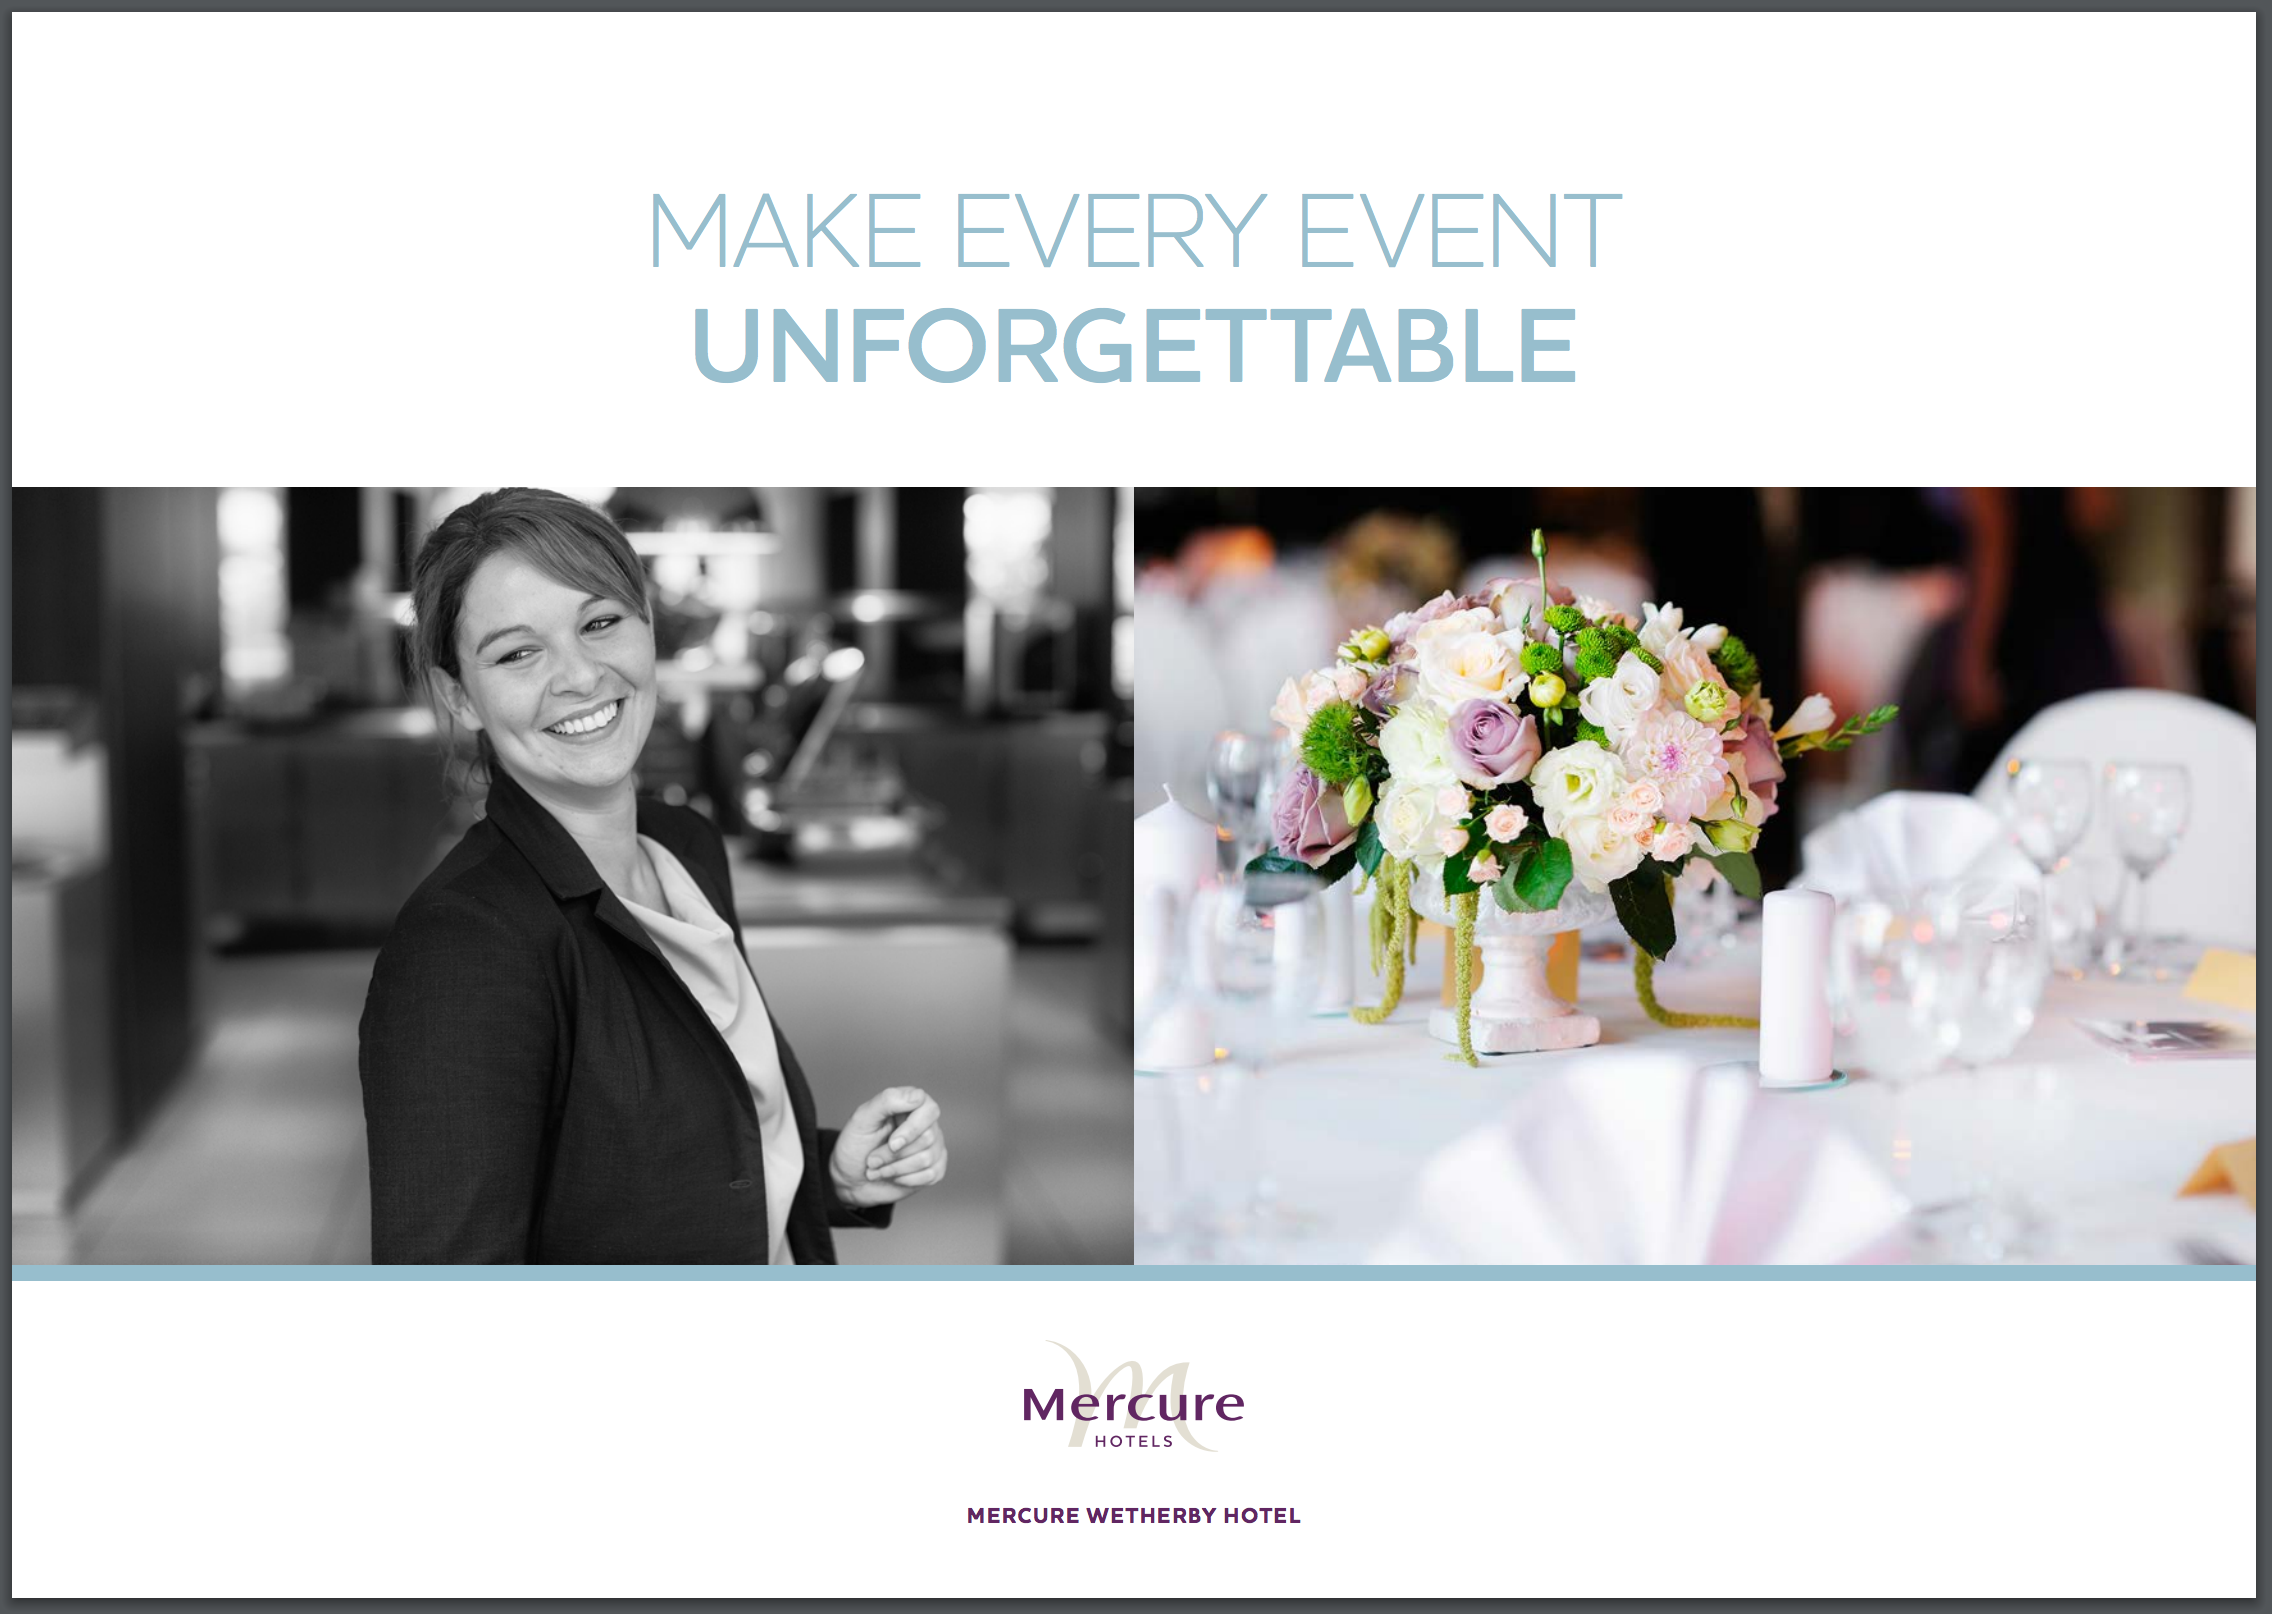 Mercure Wetherby Hotel – Events Brochure Cover